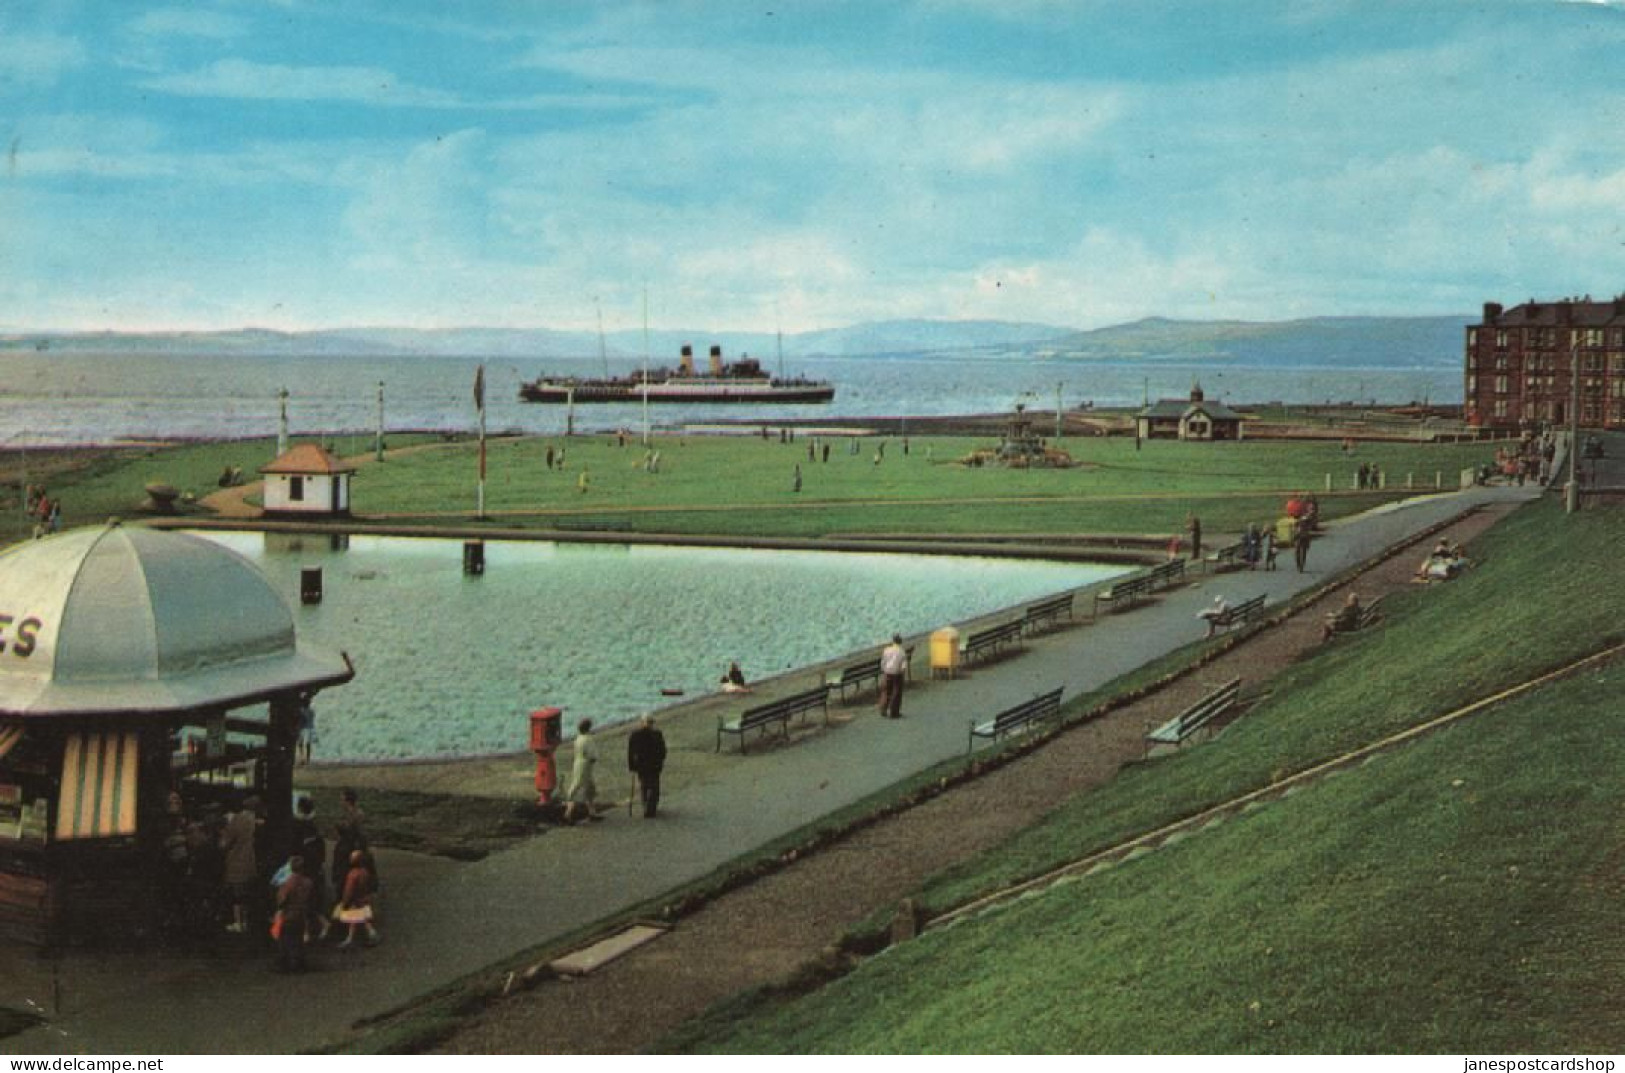 THE PROMENADE - LARGS - WITH FERRY IN DISTANCE - POSTALLY USED 1975 - RENFREWSHIRE - Ayrshire